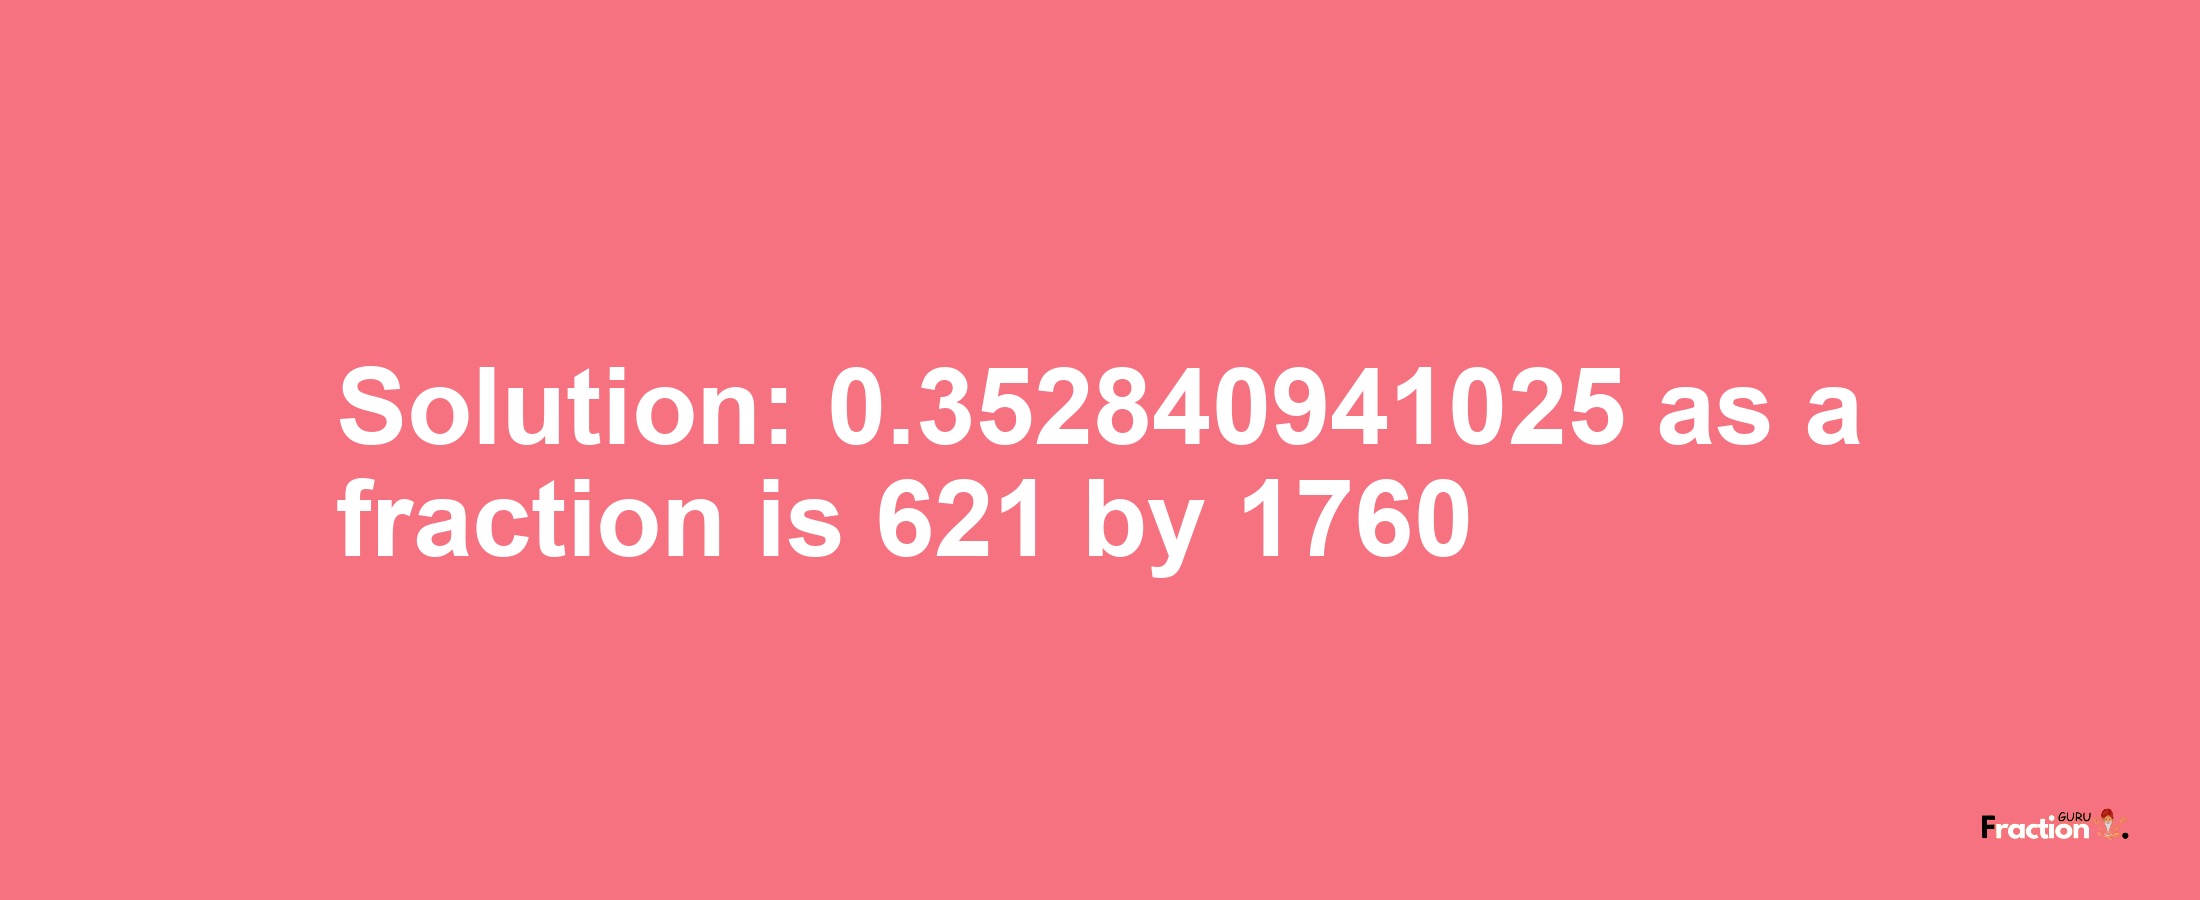 Solution:0.352840941025 as a fraction is 621/1760